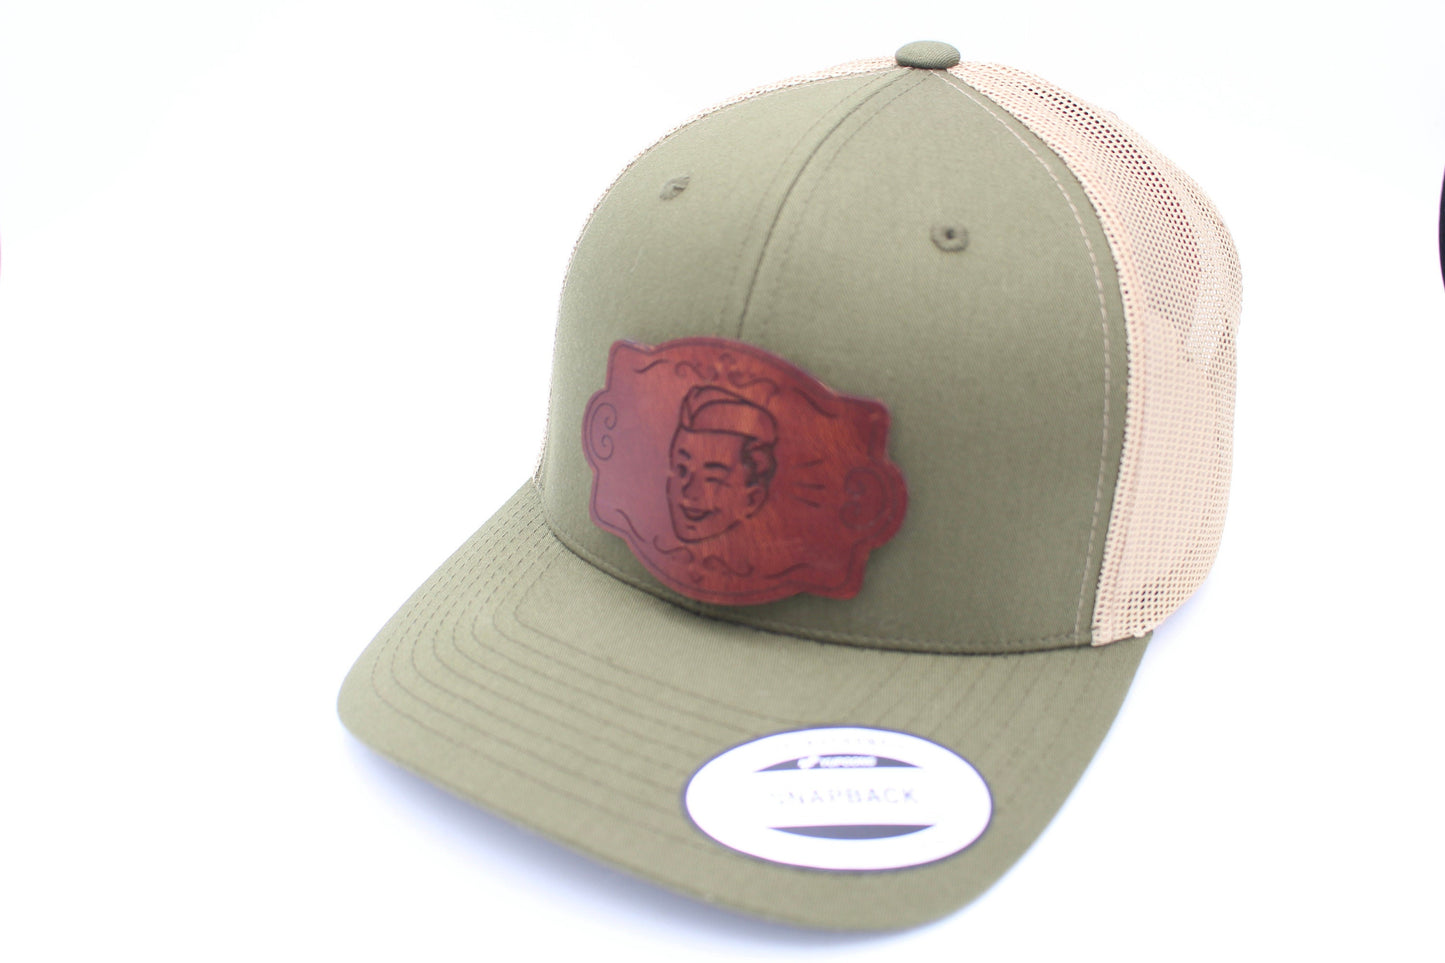 Retro Winking Boy Leather Patch Hat